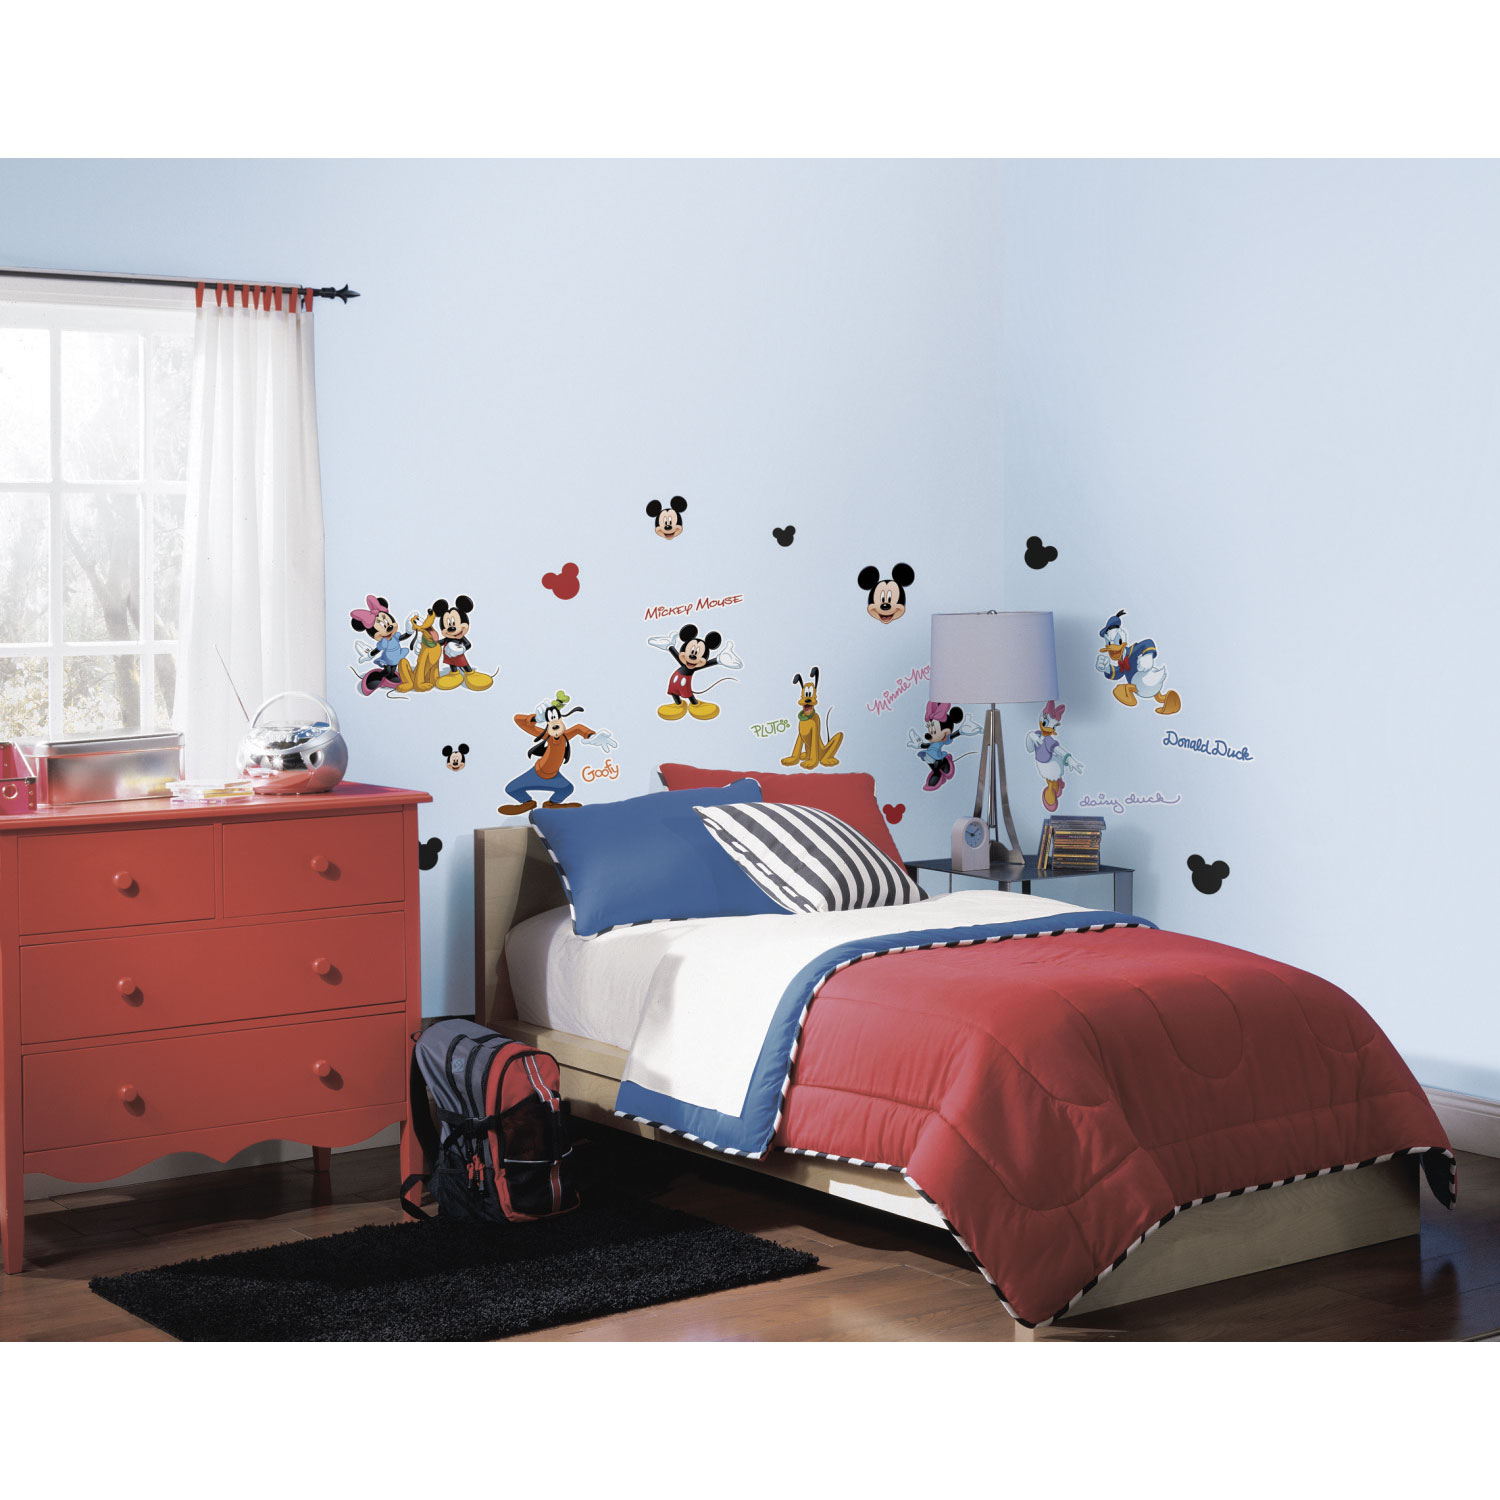 RoomMates Mickey & Friends Peel and Stick Wall Decals - Red/Black